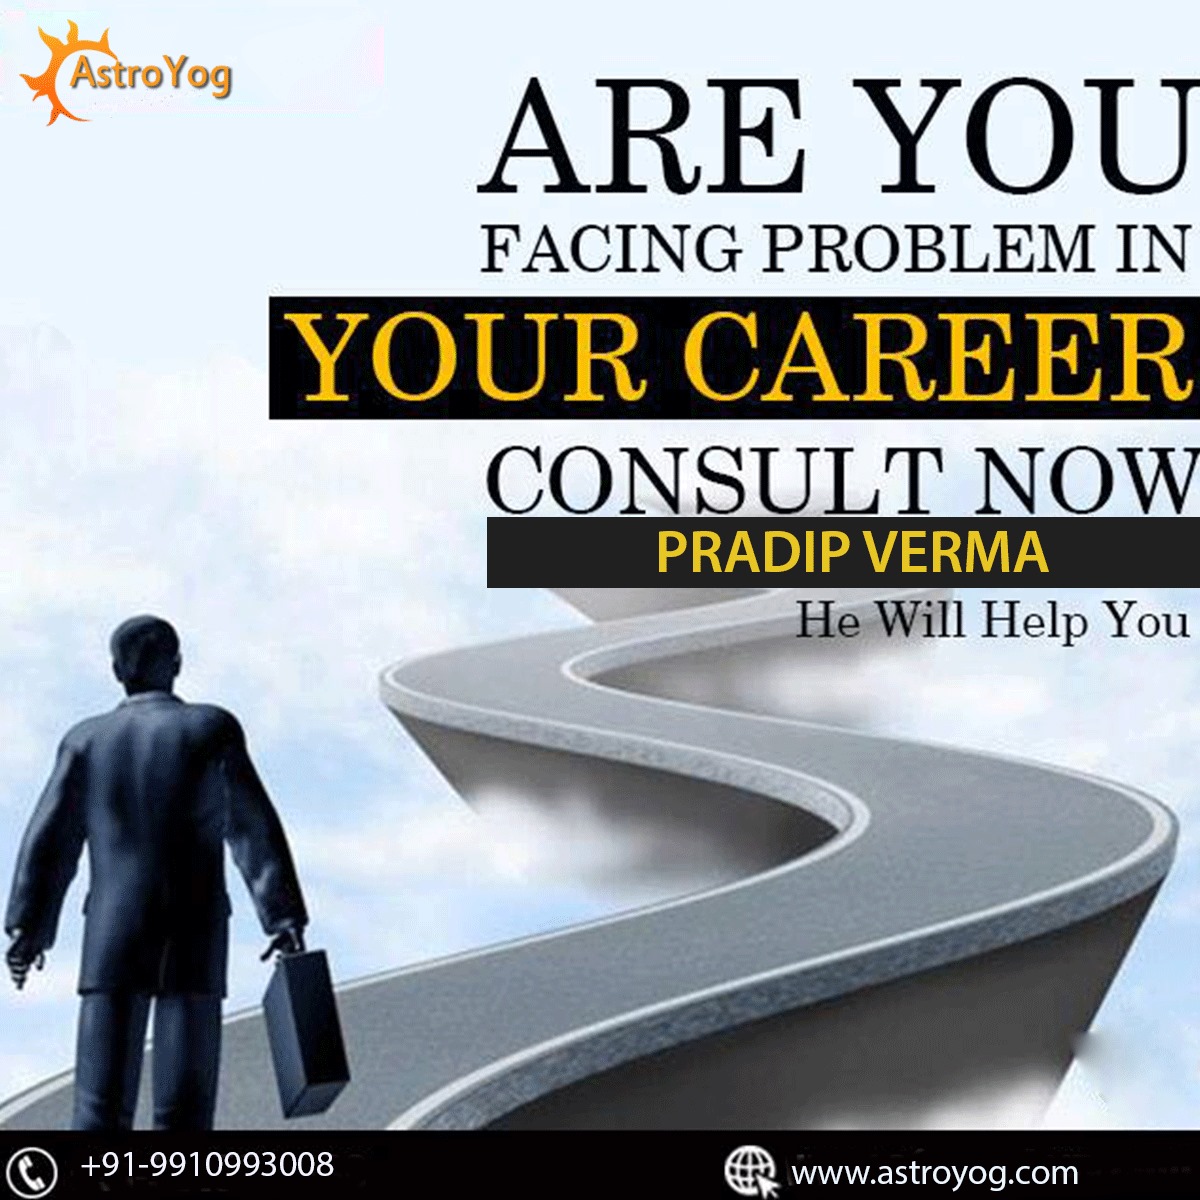 Are you facing problems in your #career, Consult now Pradip Verma, He will helps you!
Call & whatsapp - +91-9910993008
Visit us - astroyog.com
............
................
.................
#astrology #astrologers #career #mumbai
#astrology #bestastrologerindelhi